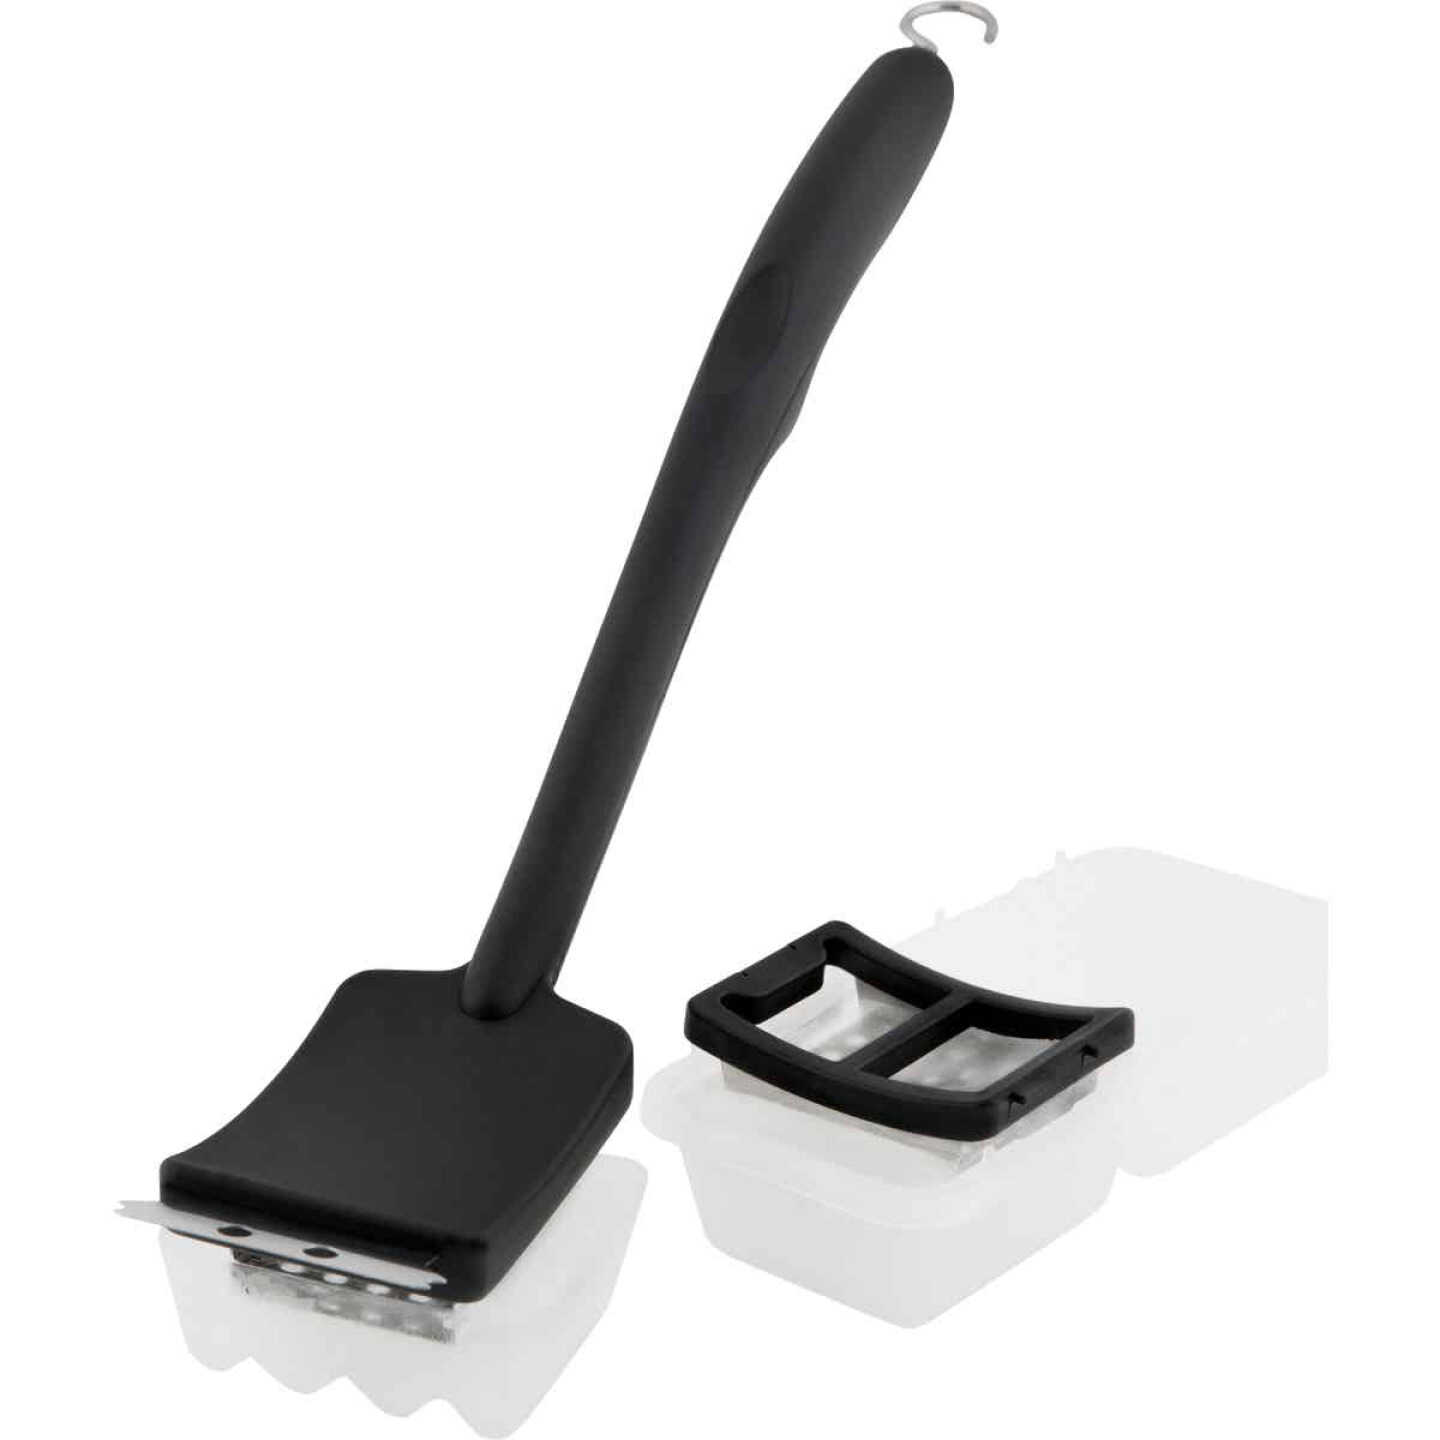 GrillPro 19.75 In. Ice Block Grill Cleaning Brush Image 1